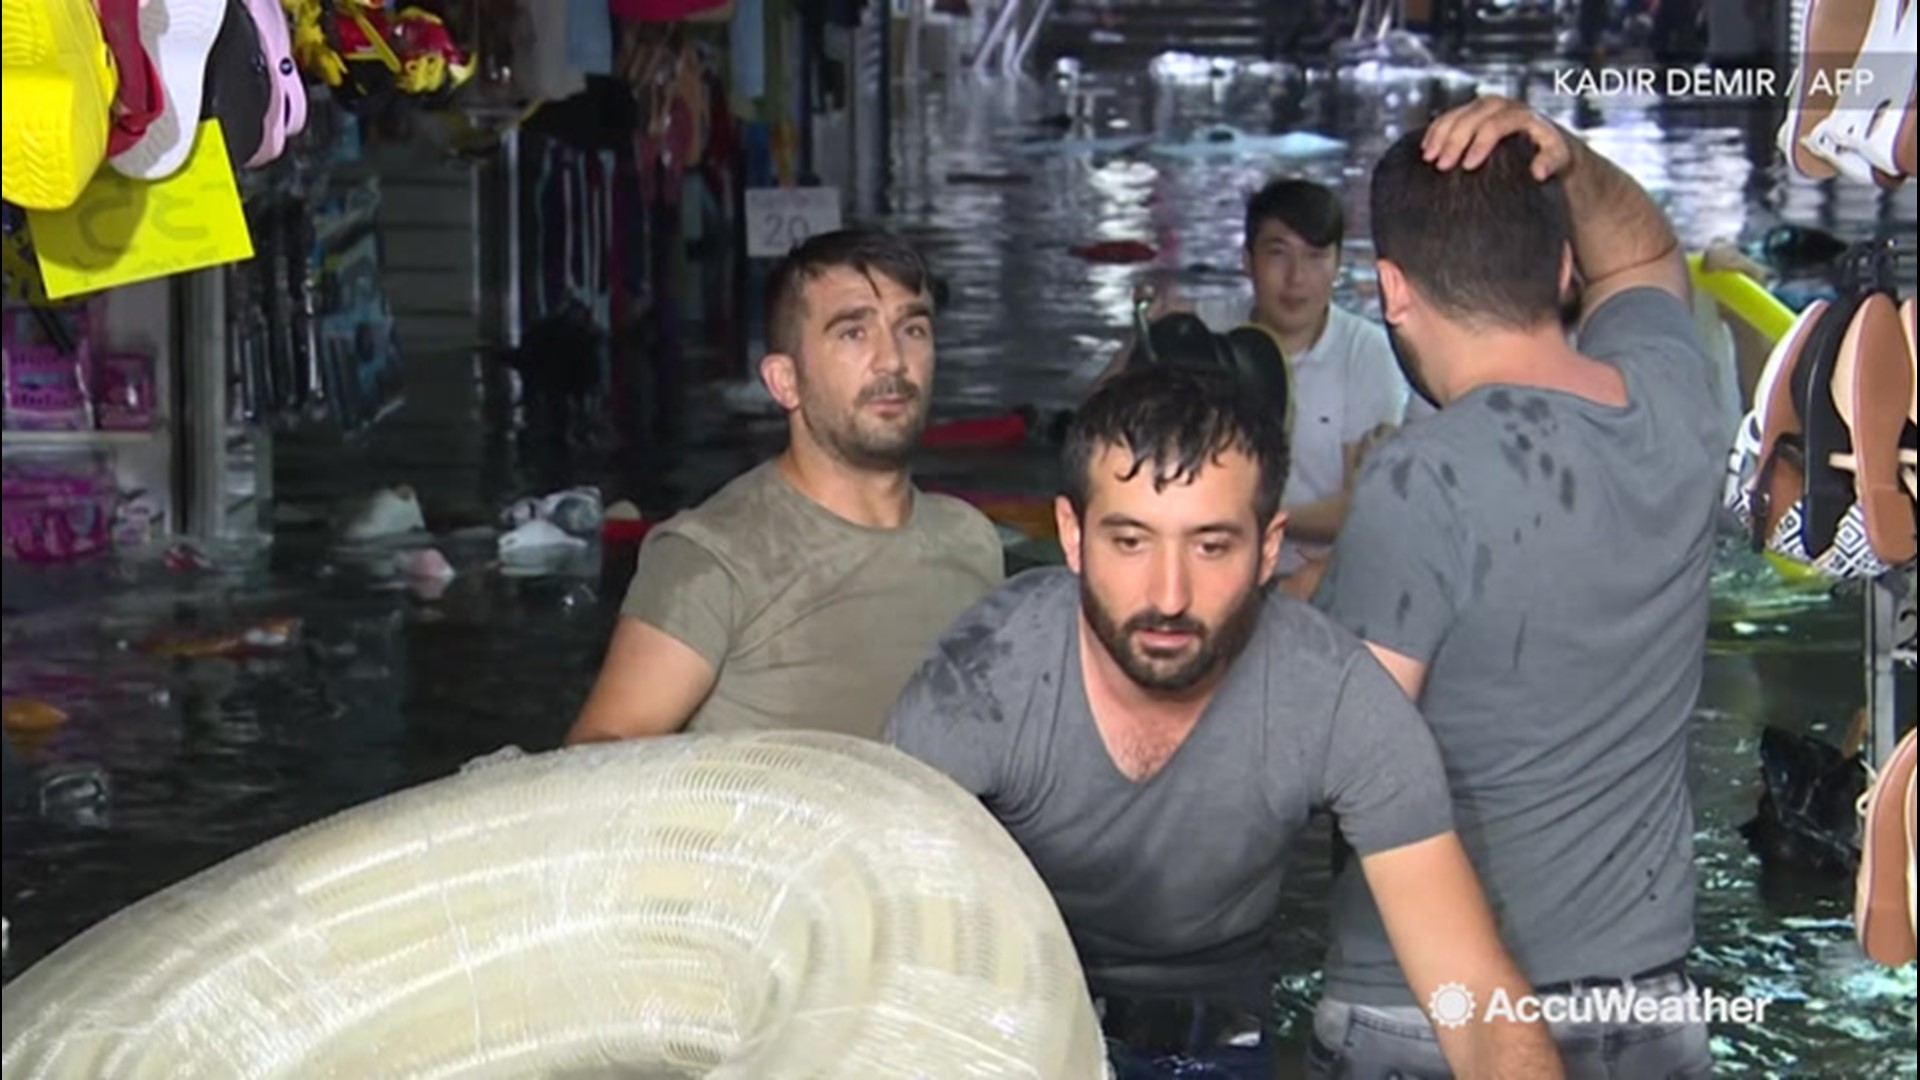 On Saturday, Aug. 17, torrential downpours assaulted Istanbul, Turkey, resulting in deadly flooding. Multiple buildings in the historic Grand Bazaar became inundated, and a homeless man was found dead among the water.